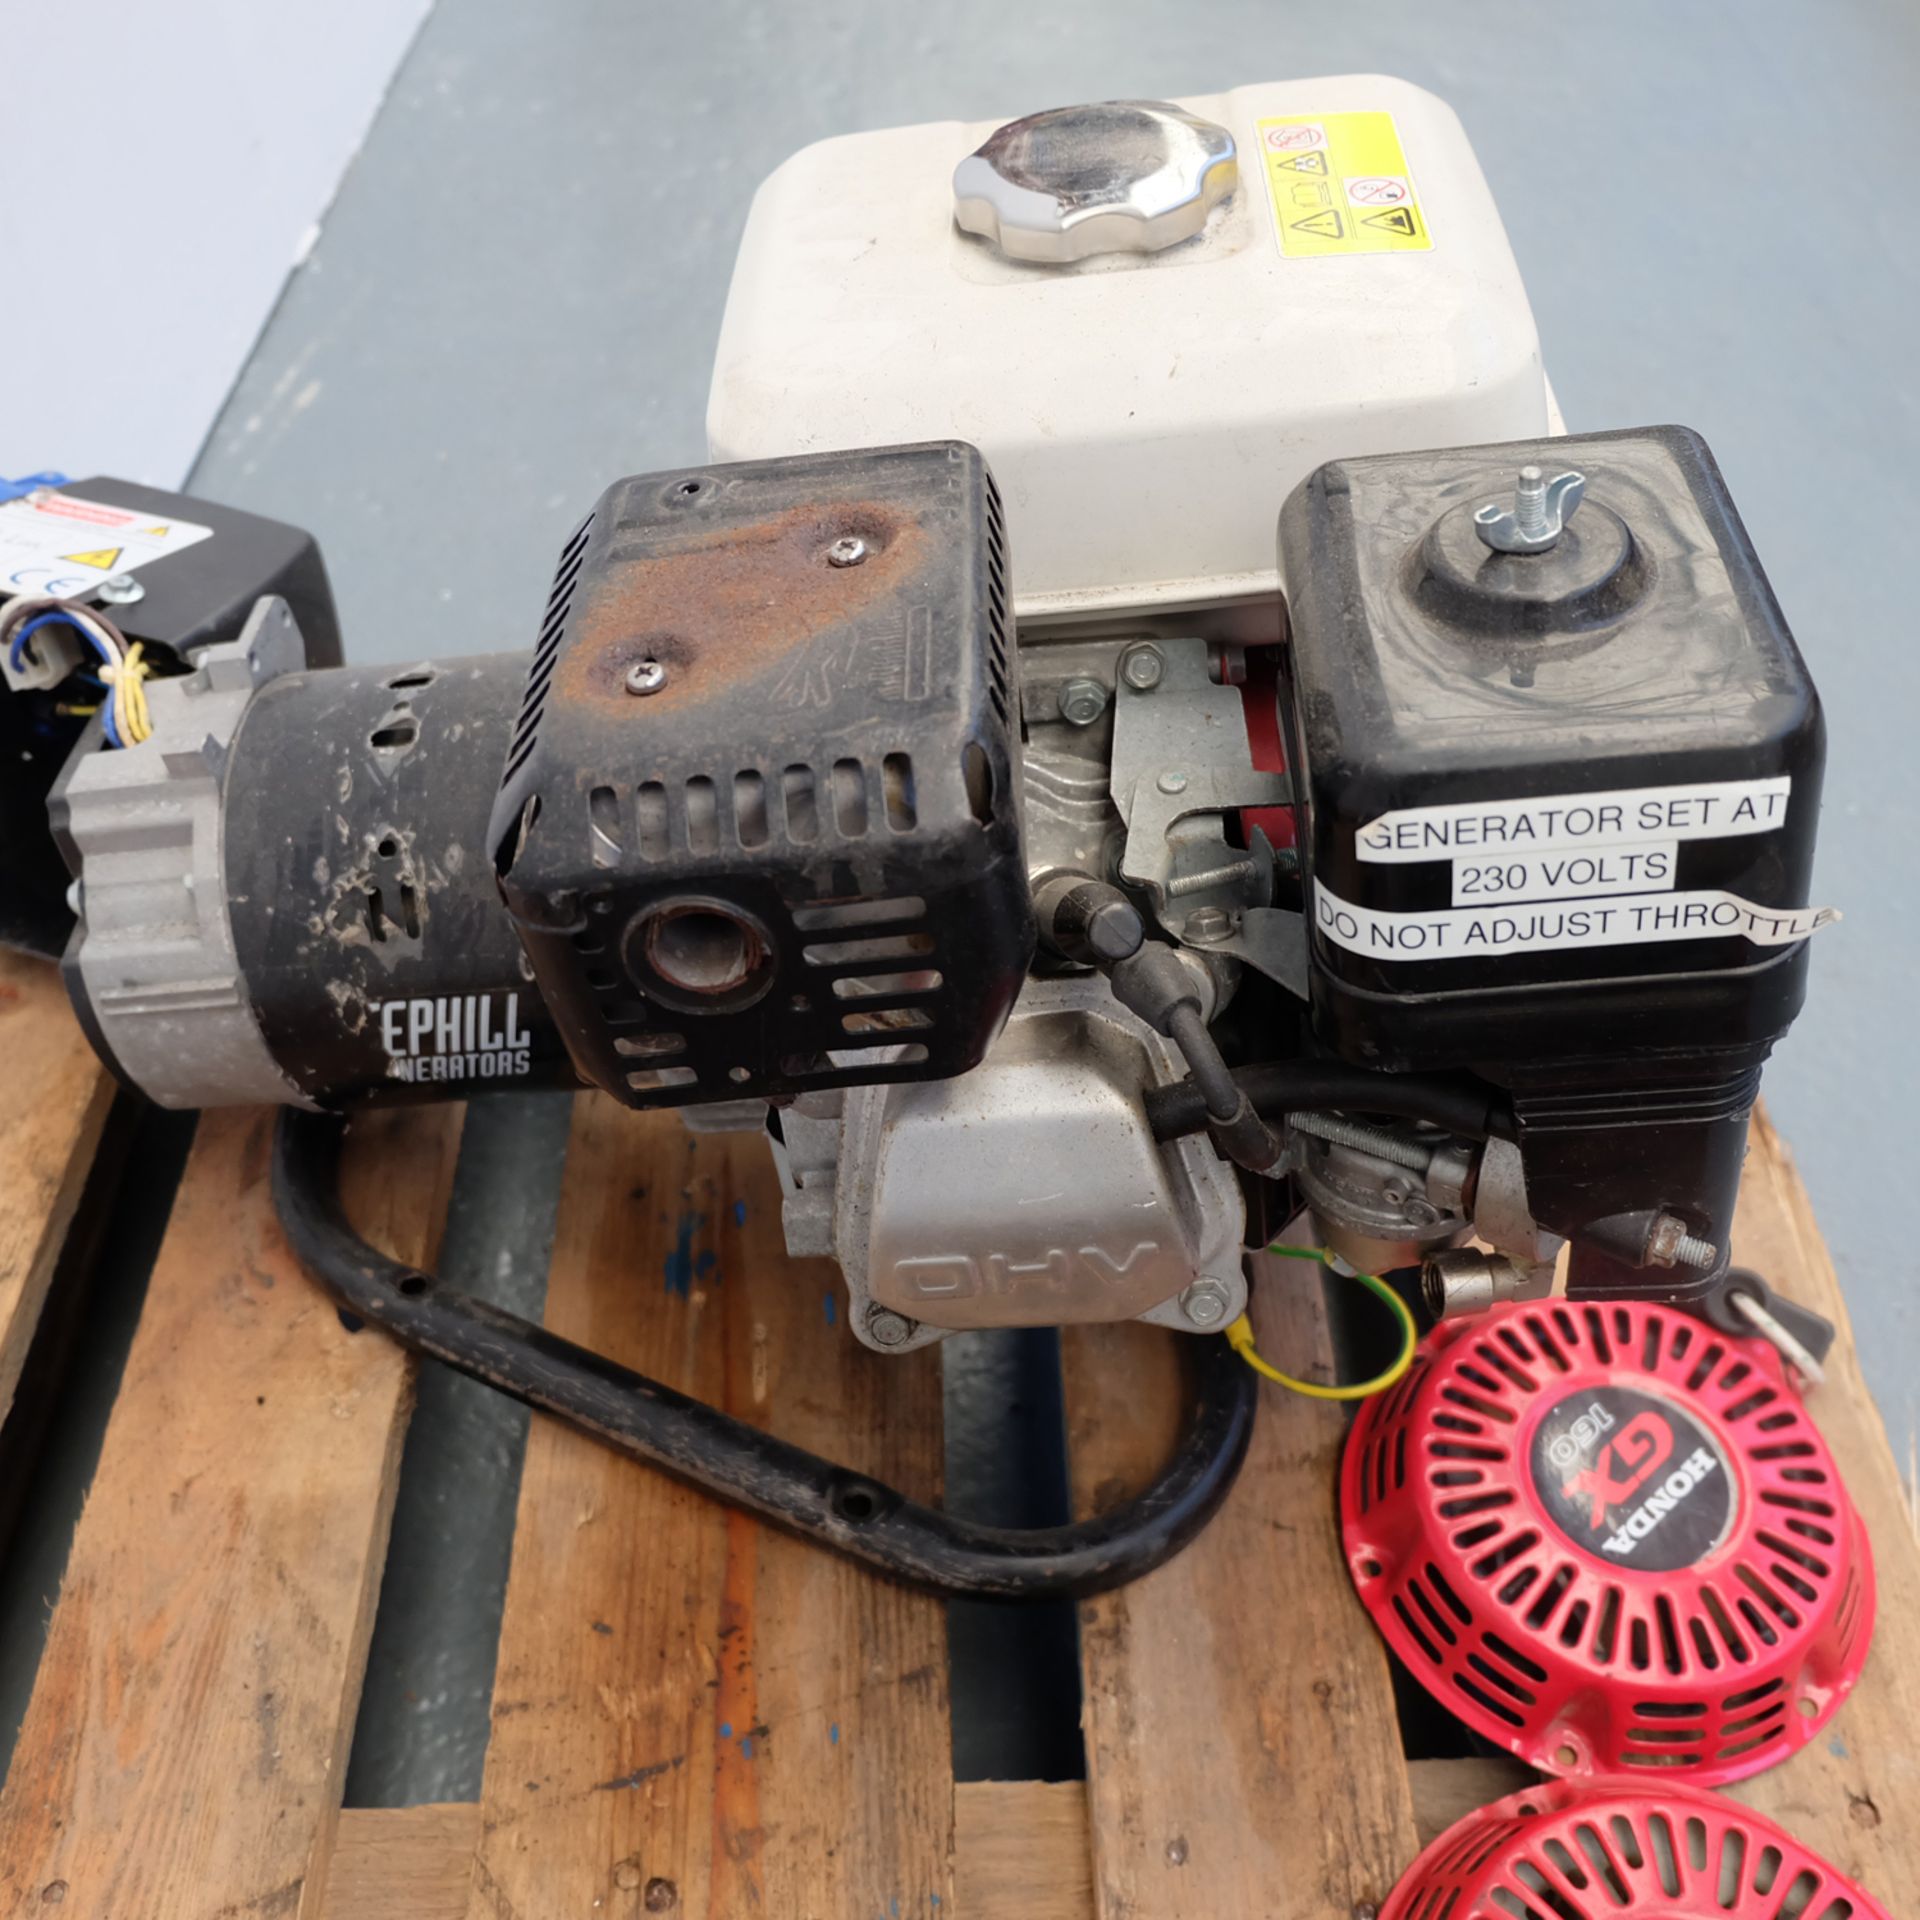 2 x Generators - Note this lot is for Spares or Repairs. - Image 7 of 7